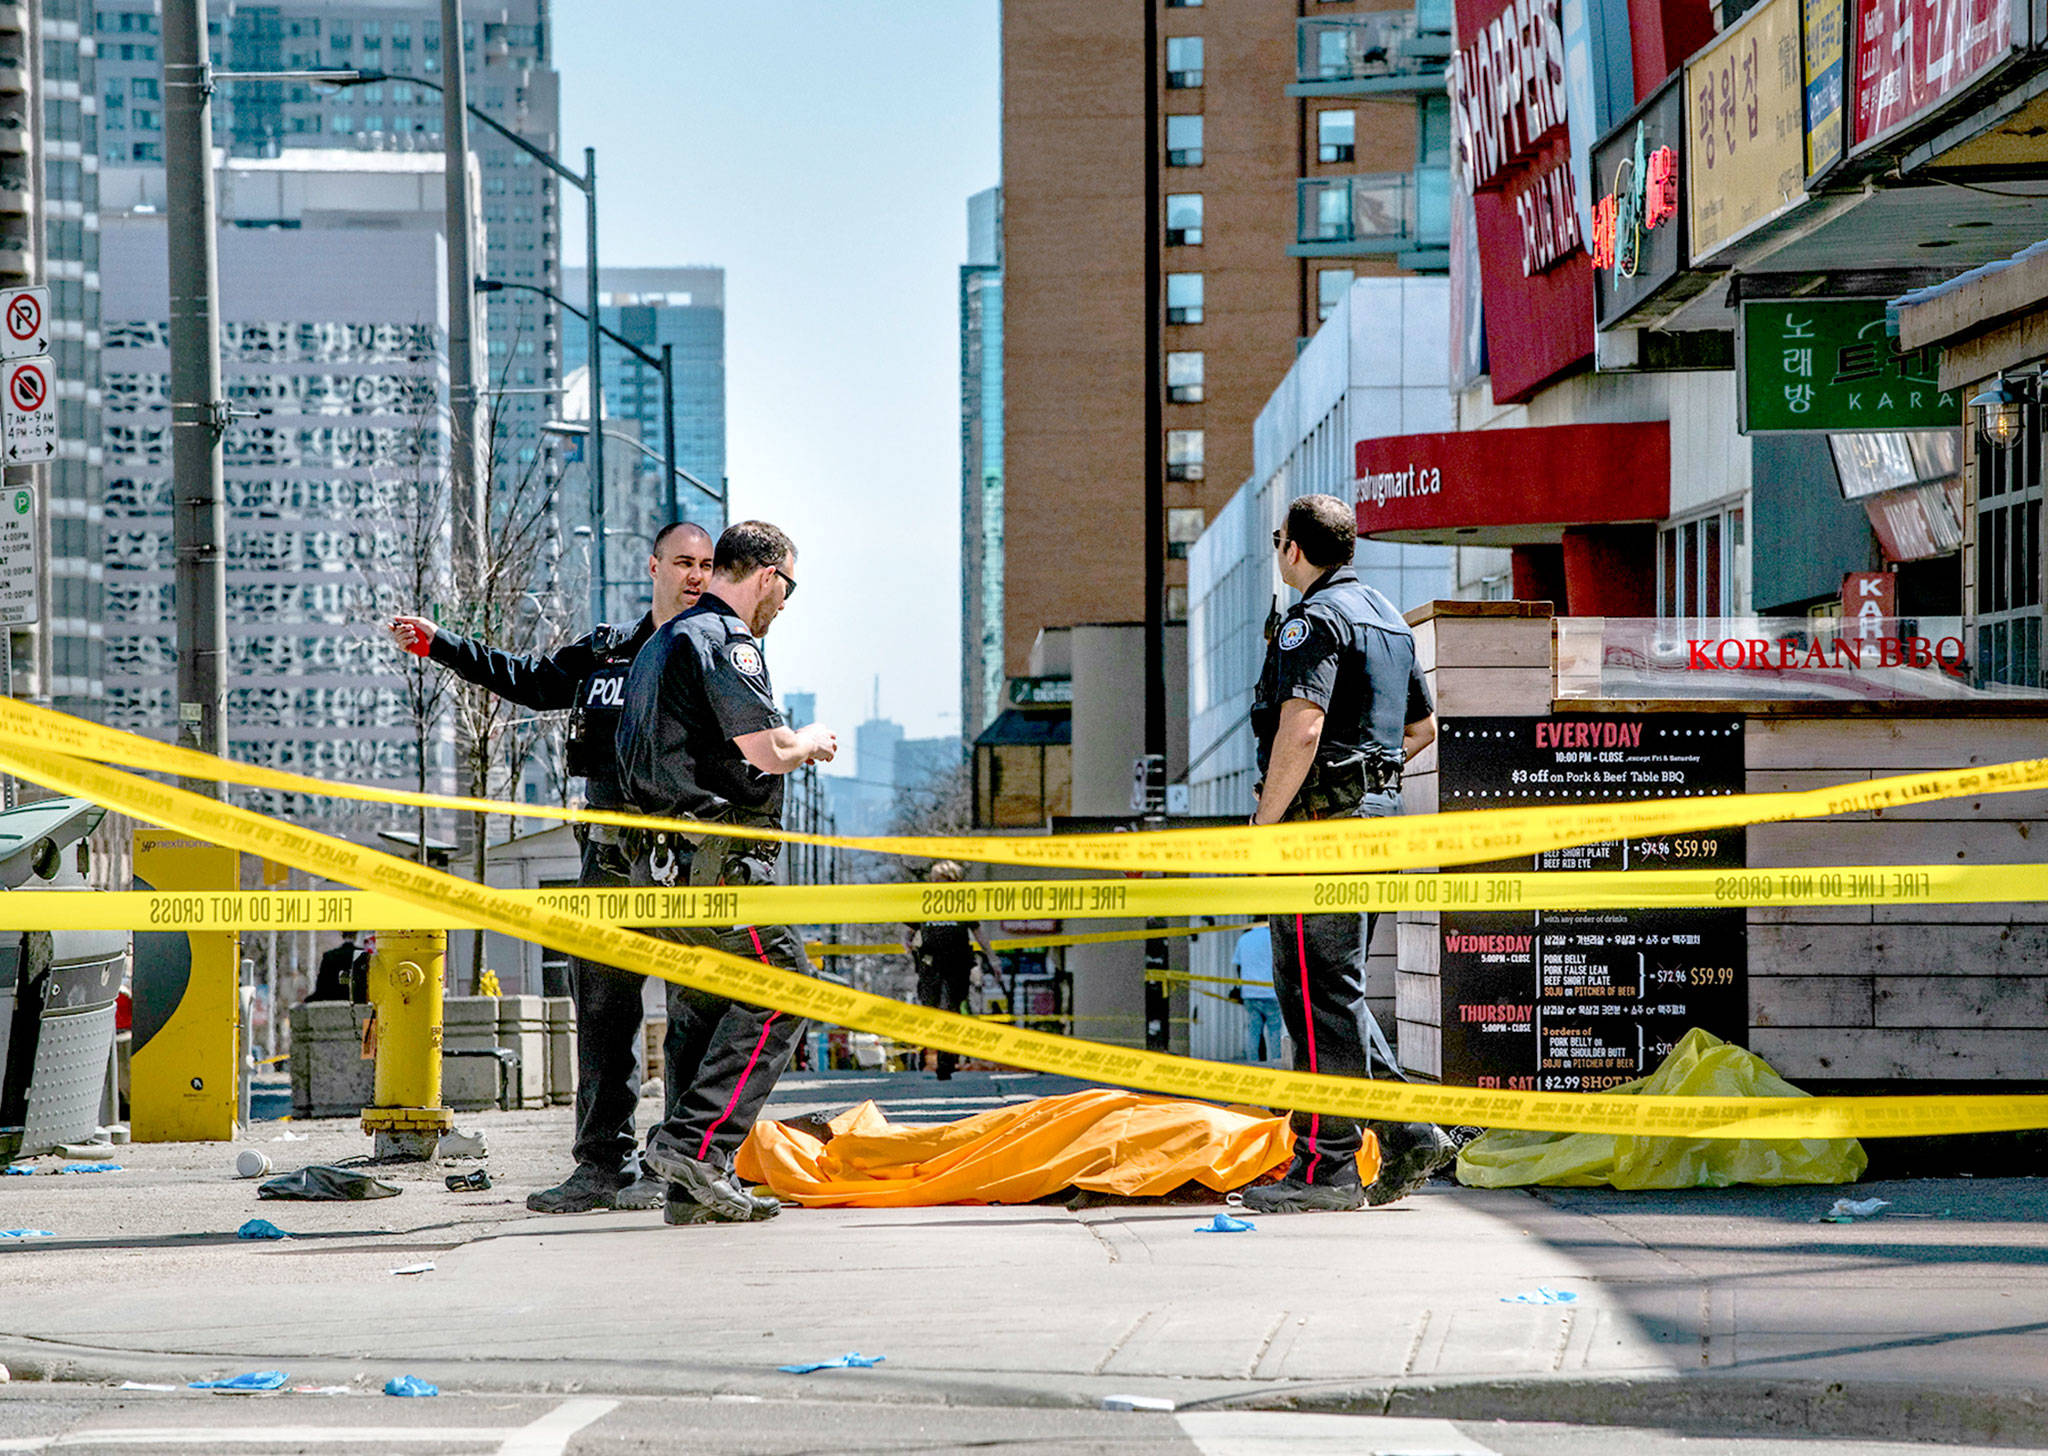 Police officers stand by a body covered on the sidewalk in Toronto after a van crashed into a crowd of pedestrians on Monday. (Aaron Vincent Elkaim/The Canadian Press via AP)